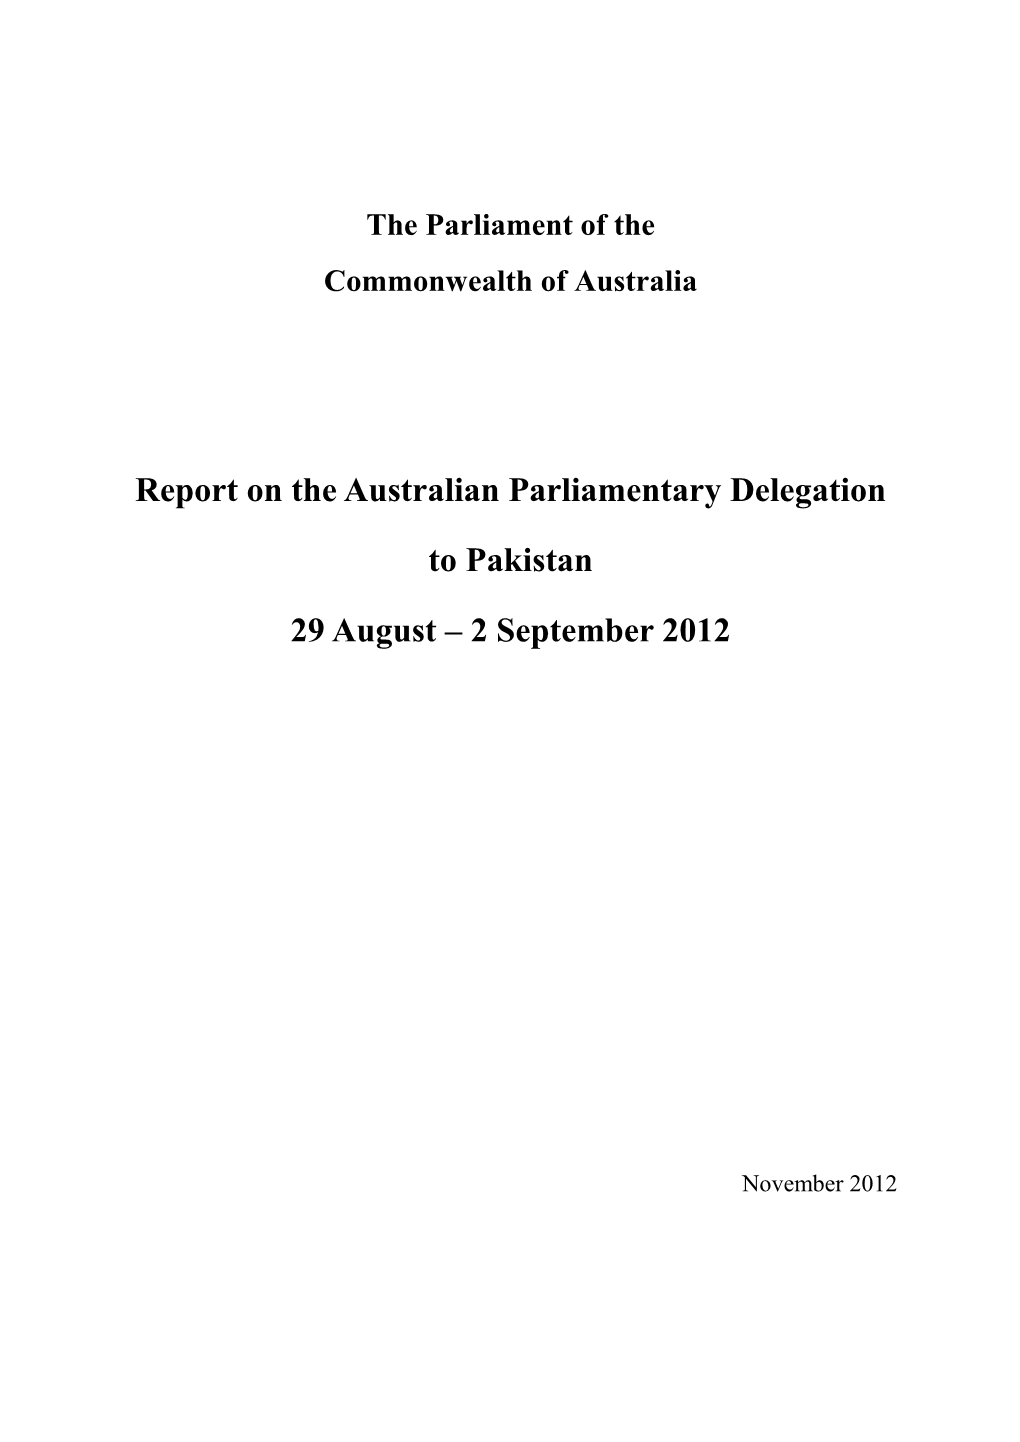 Report of the Australian Parliamentary Delegation to Pakistan 2012